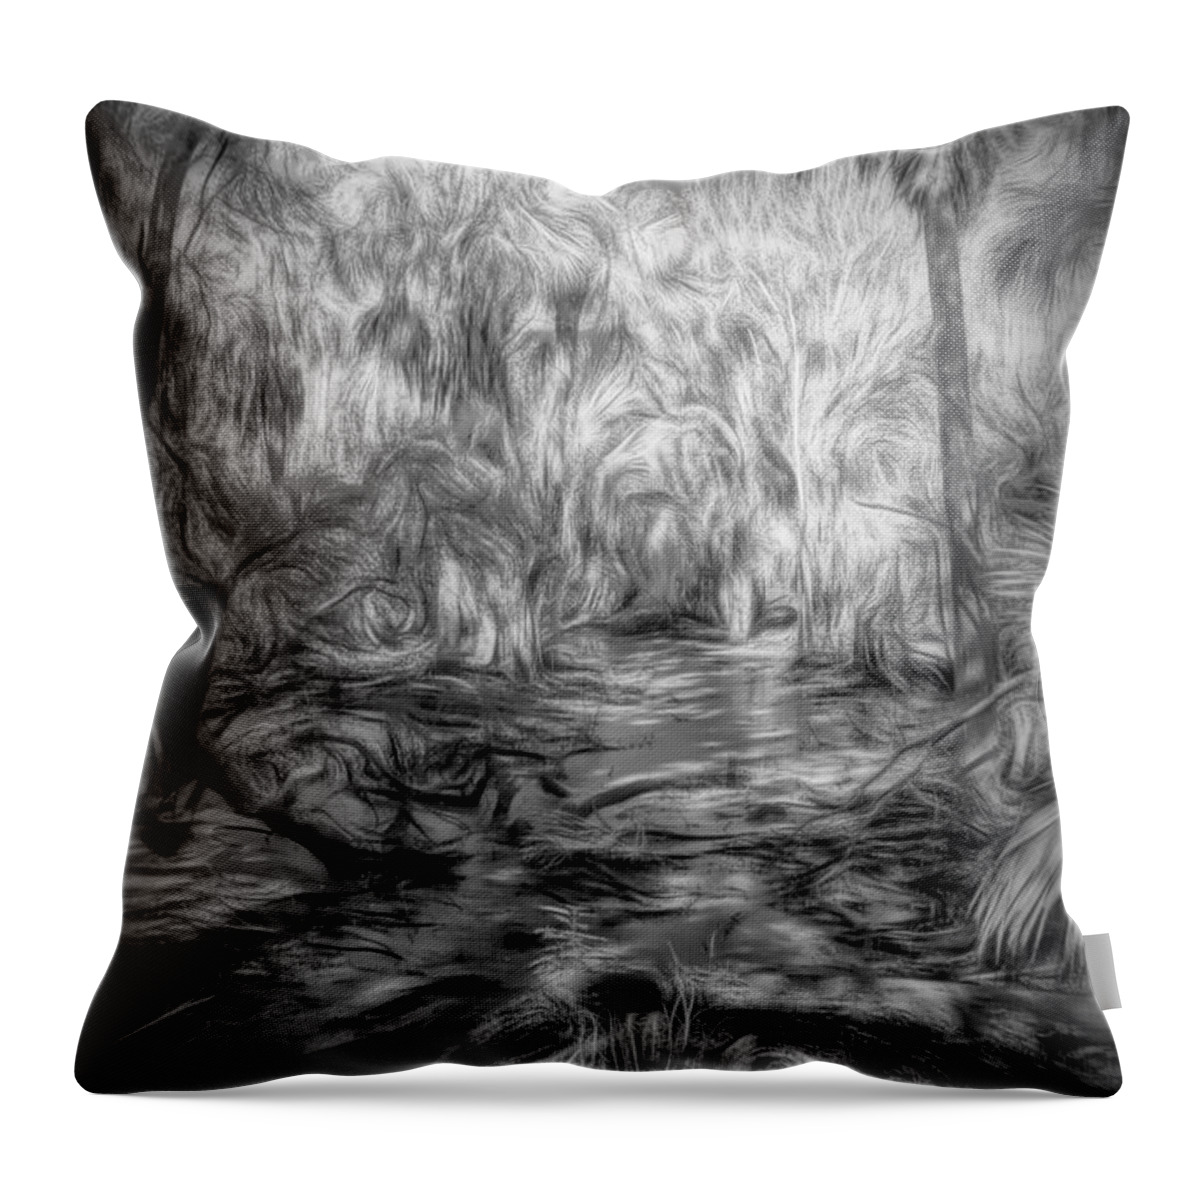 Swamp Throw Pillow featuring the photograph Swamp Dream by Jim Cook